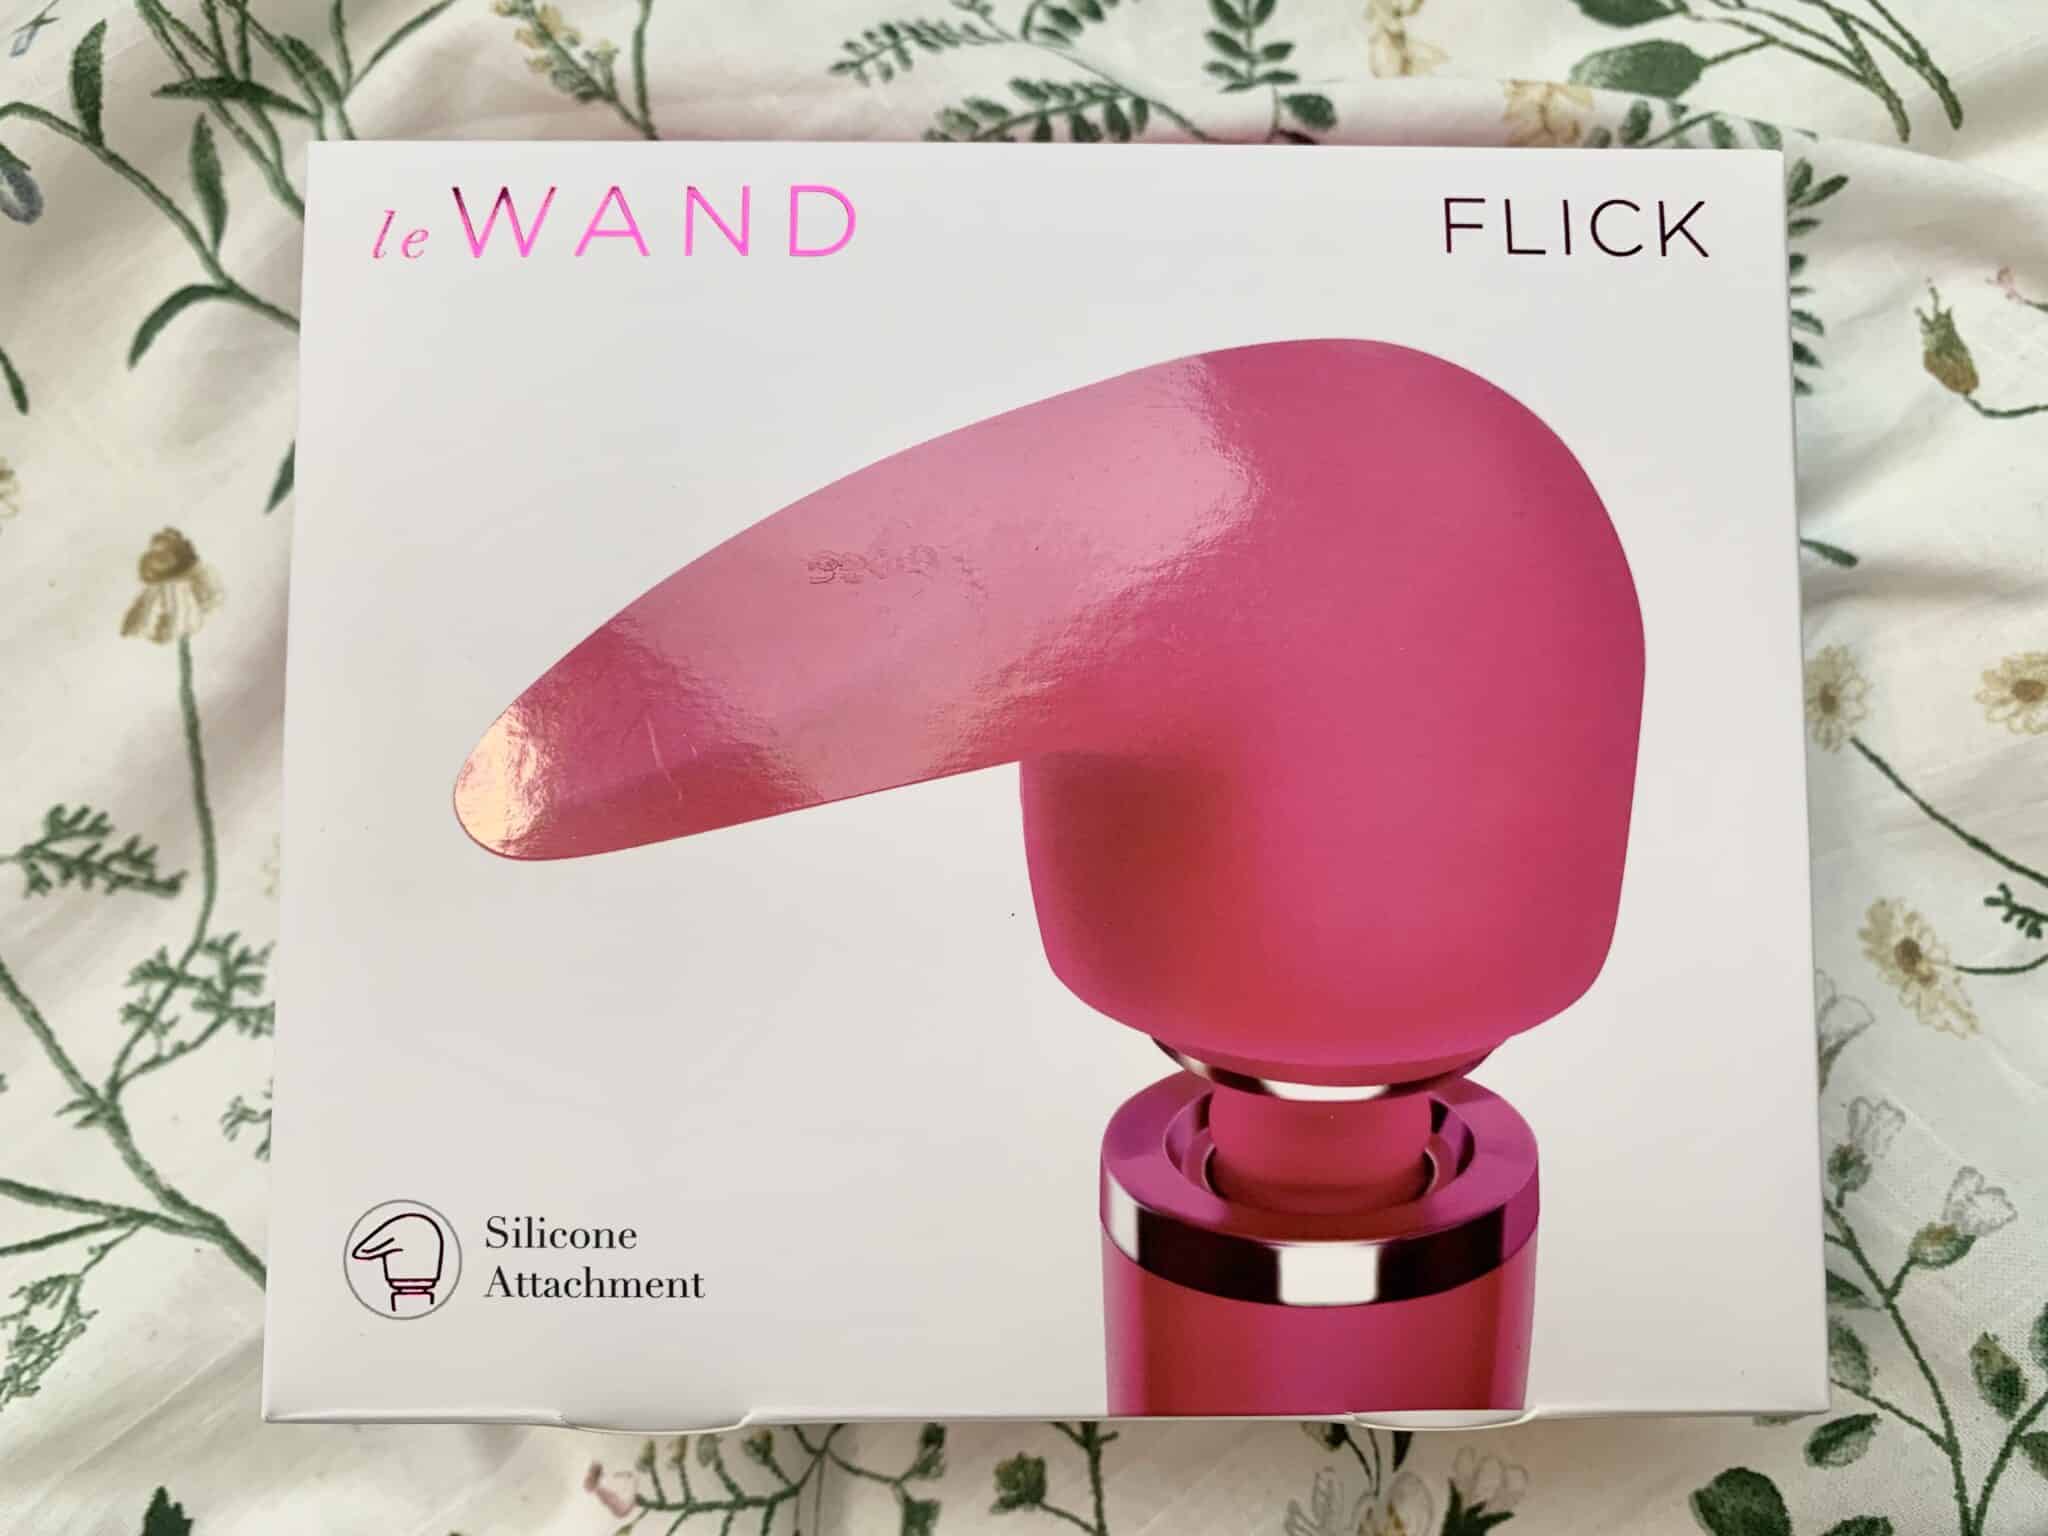 Le Wand Flick The Unboxing Experience: A Review